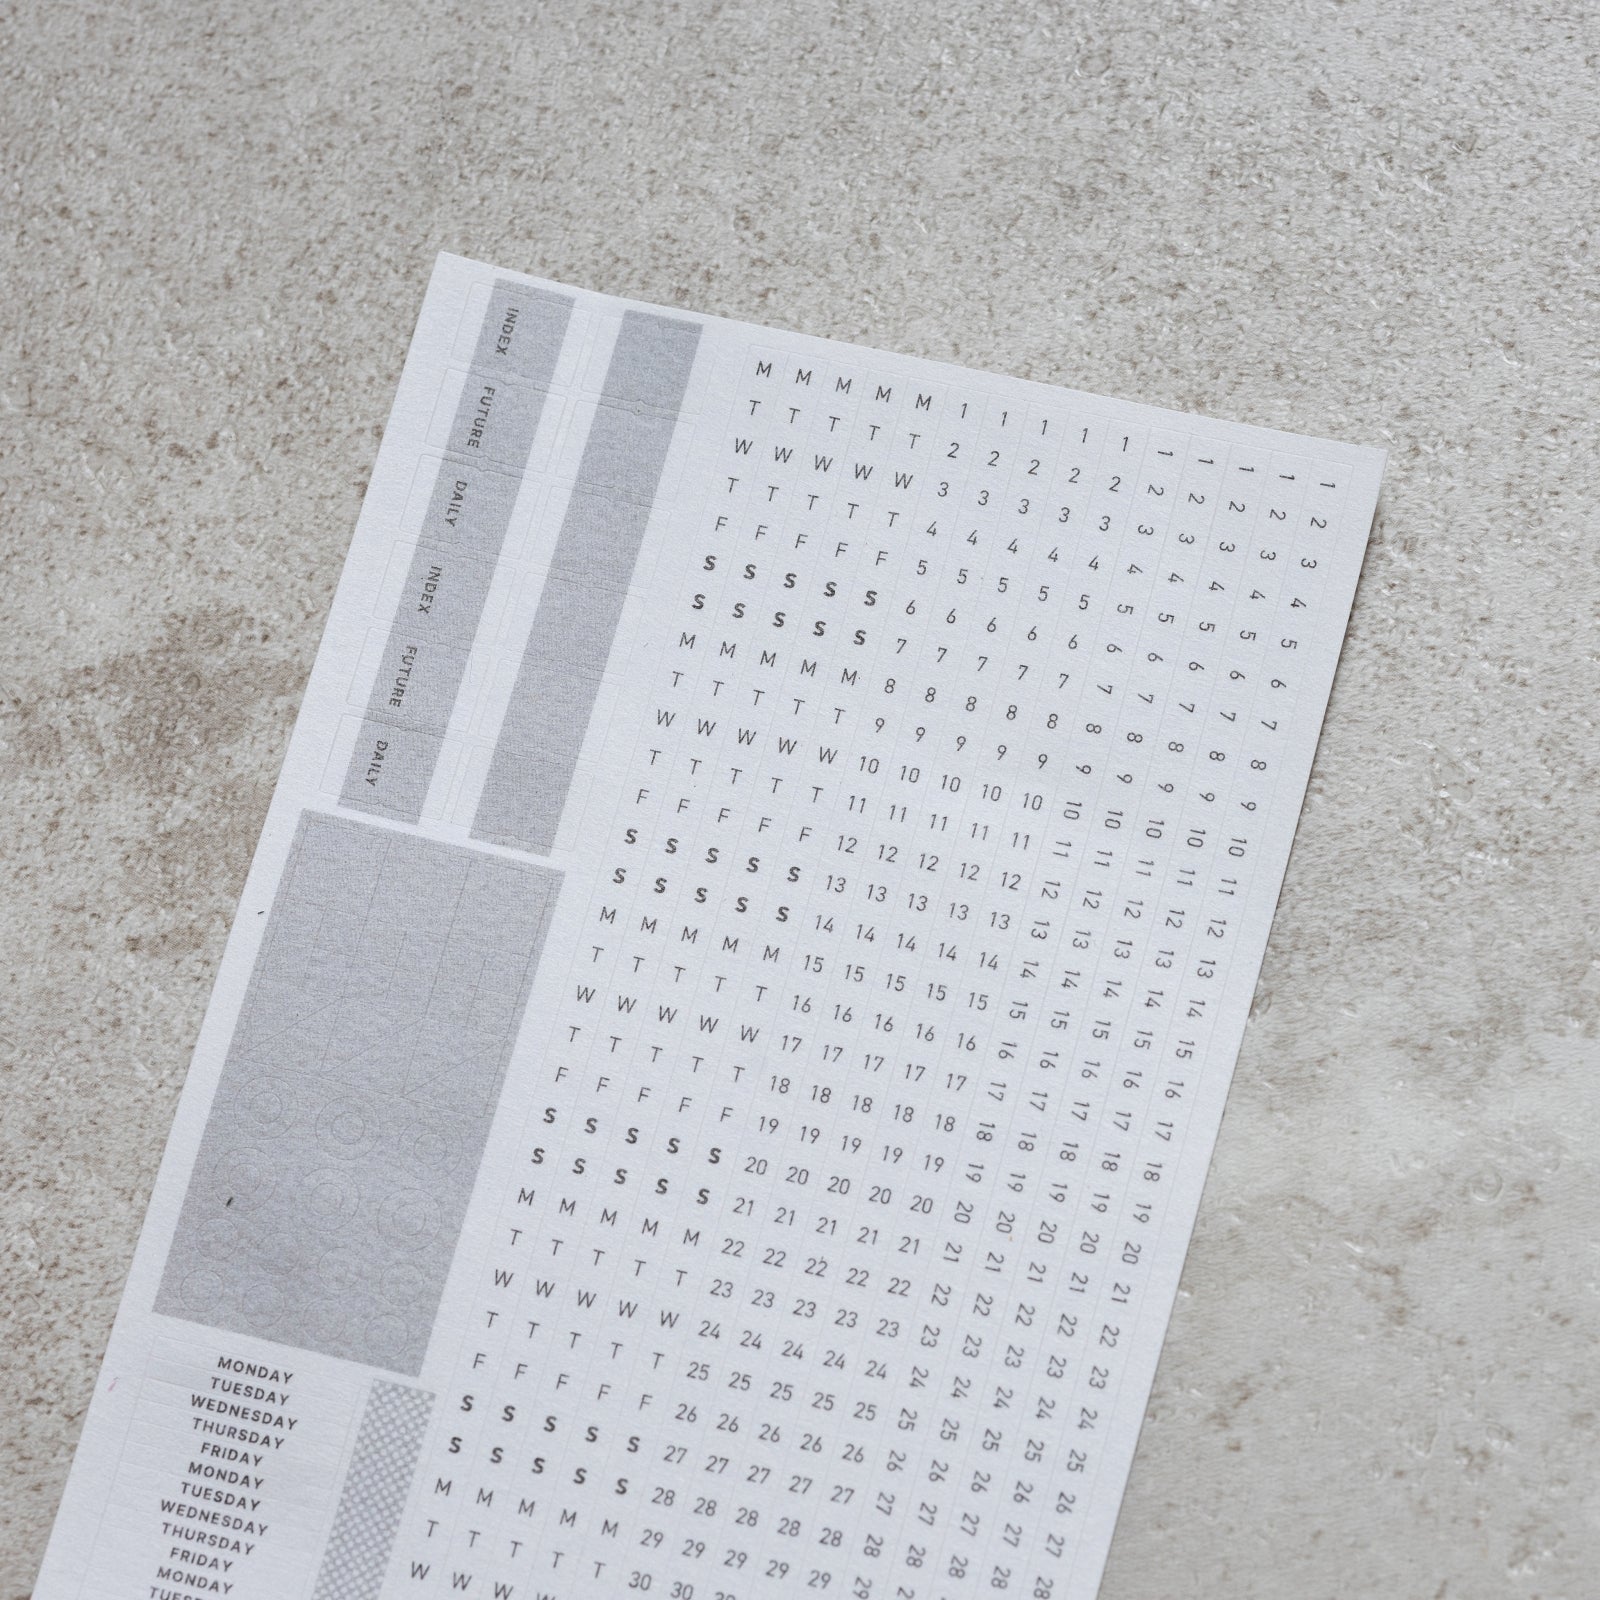 "RECORD" - CALENDAR, MONTHLY DAILY BULLET JOURNAL WASHI STICKERS (2 sheets)